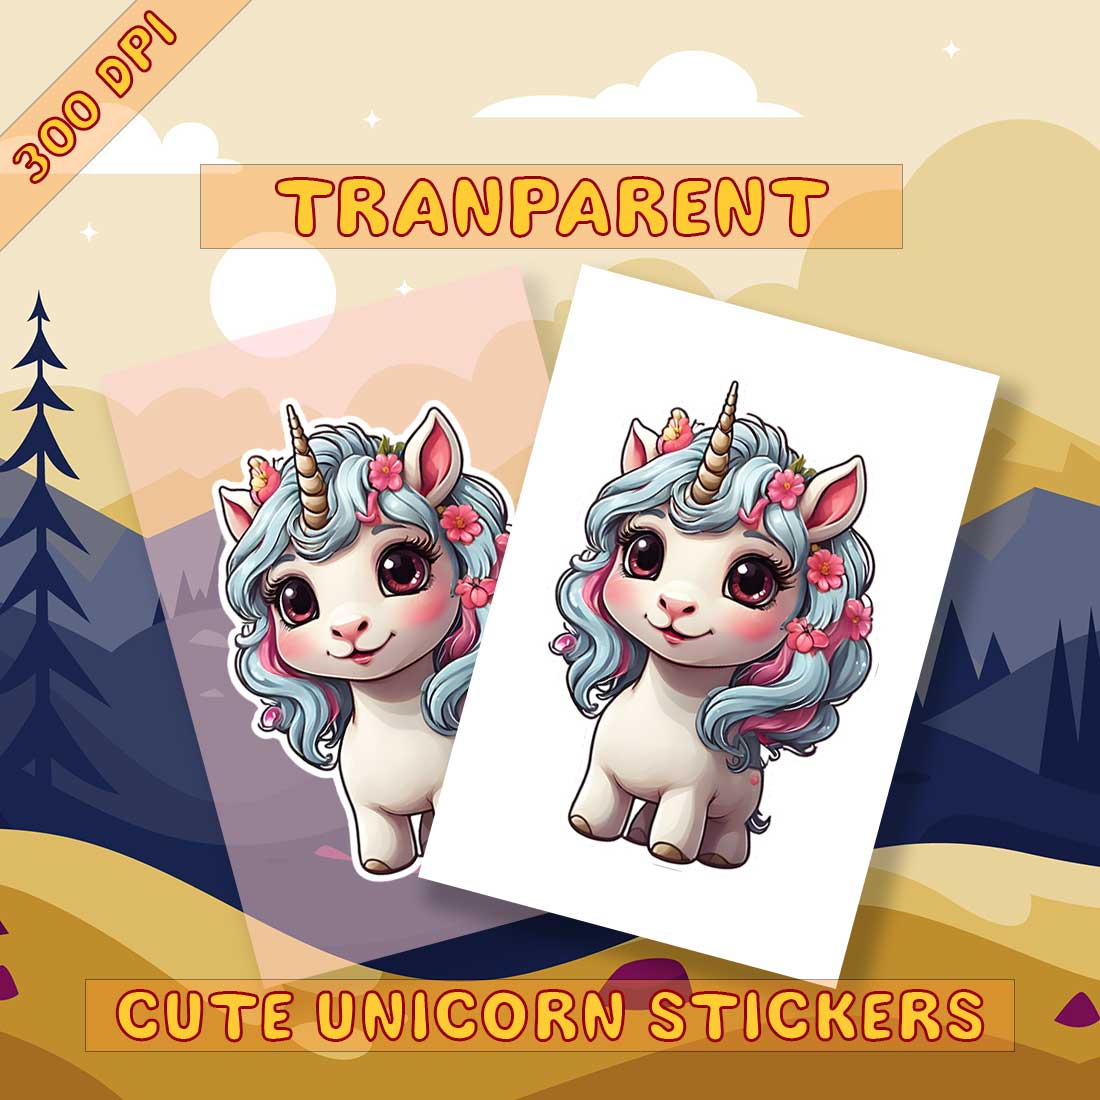 Illustrational Unicorn Sticker Pack 2 preview image.